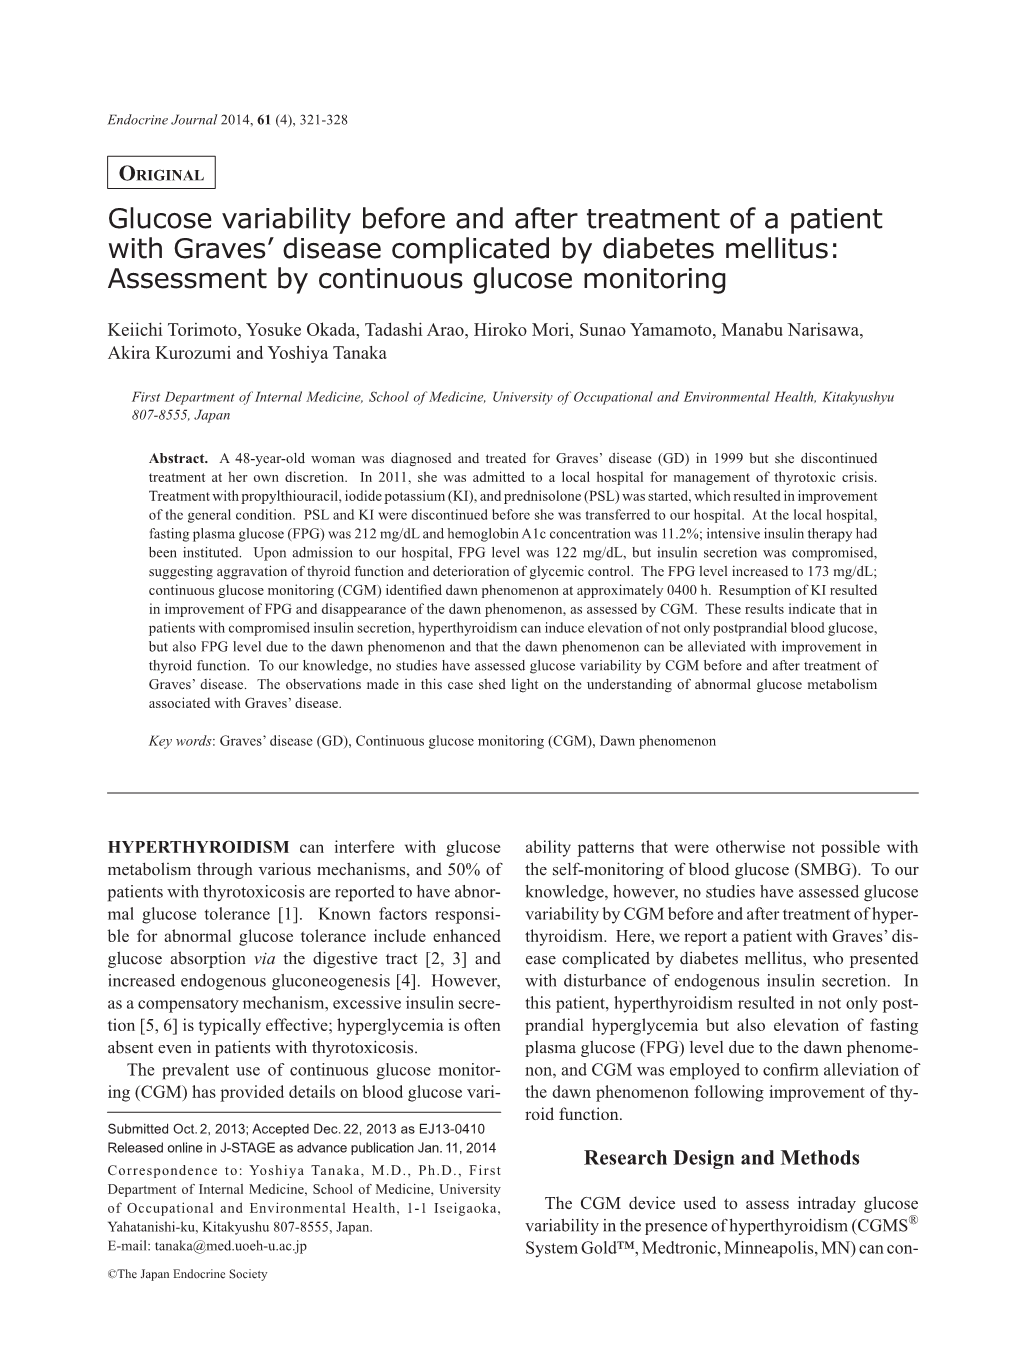 Glucose Variability Before and After Treatment of a Patient with Graves’ Disease Complicated by Diabetes Mellitus: Assessment by Continuous Glucose Monitoring